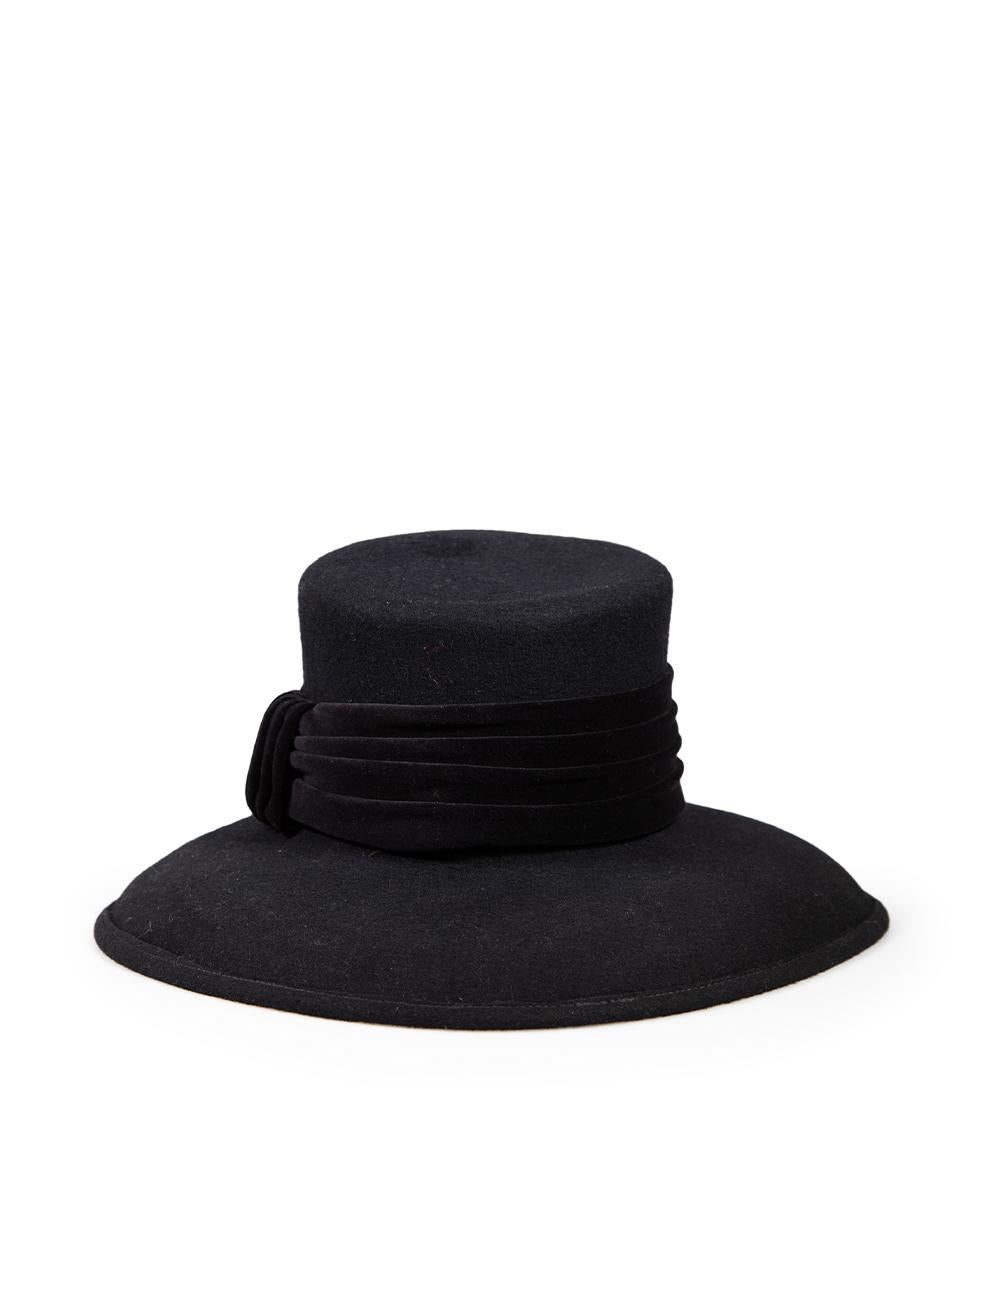 CONDITION is Very good. Hardly any visible wear to hat is evident on this used Kangol designer resale item.
 
 
 
 Details
 
 
 Vintage 
 
 Black
 
 Wool
 
 Fedora hat
 
 Velvet bow detail
 
 
 
 
 
 Made in UK
 
 
 
 Composition
 
 100% Wool
 
 
 
